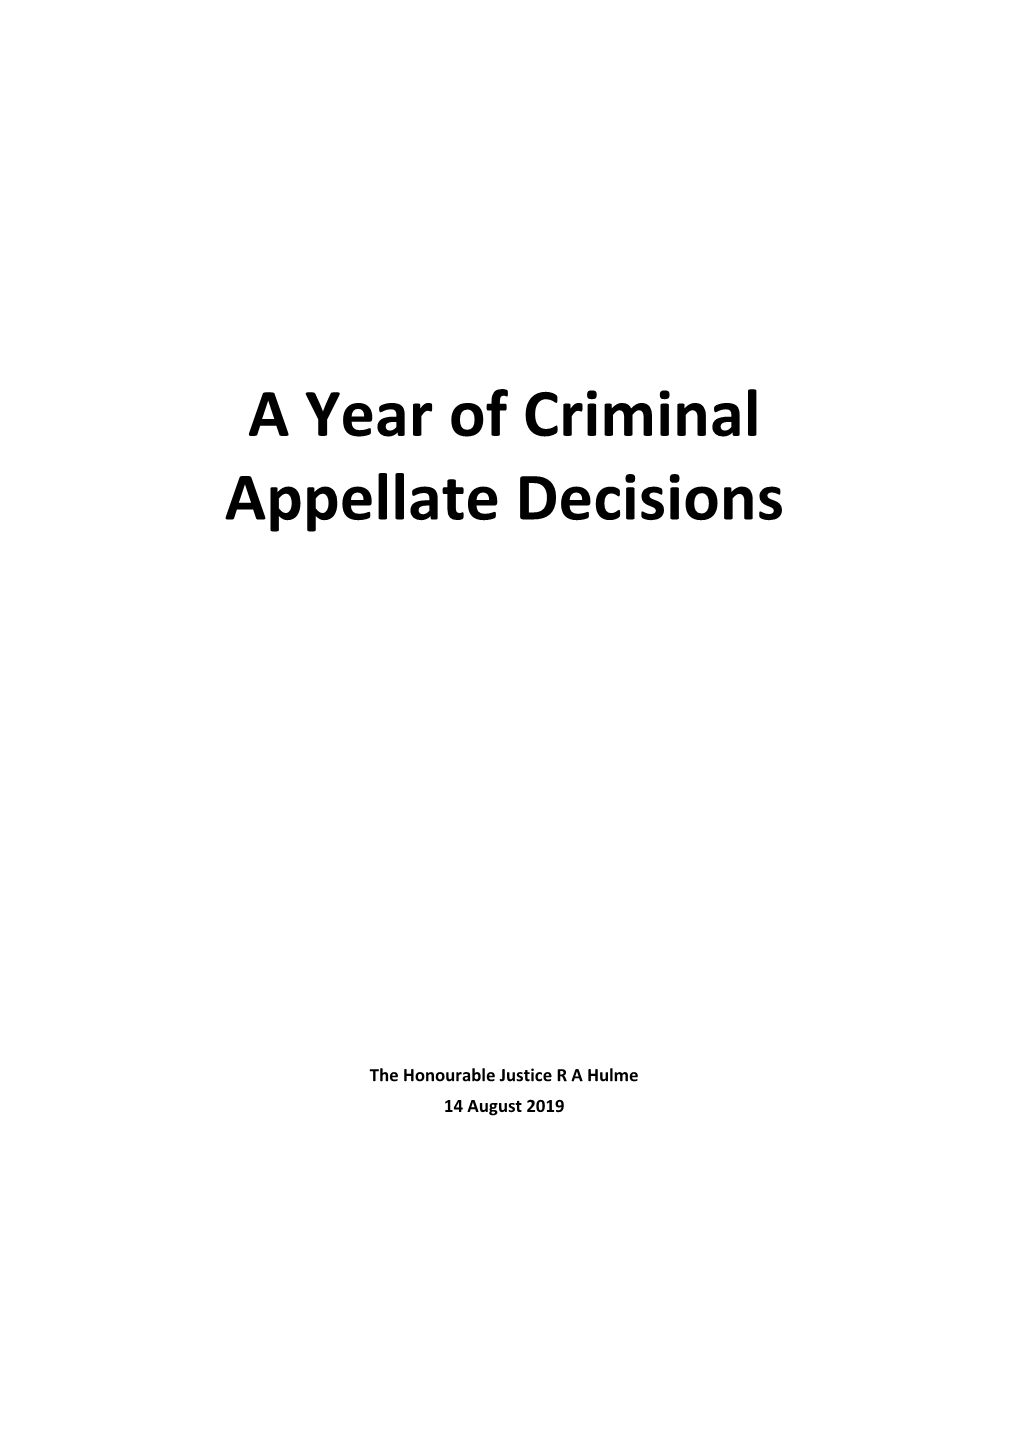 A Year of Criminal Appellate Decisions